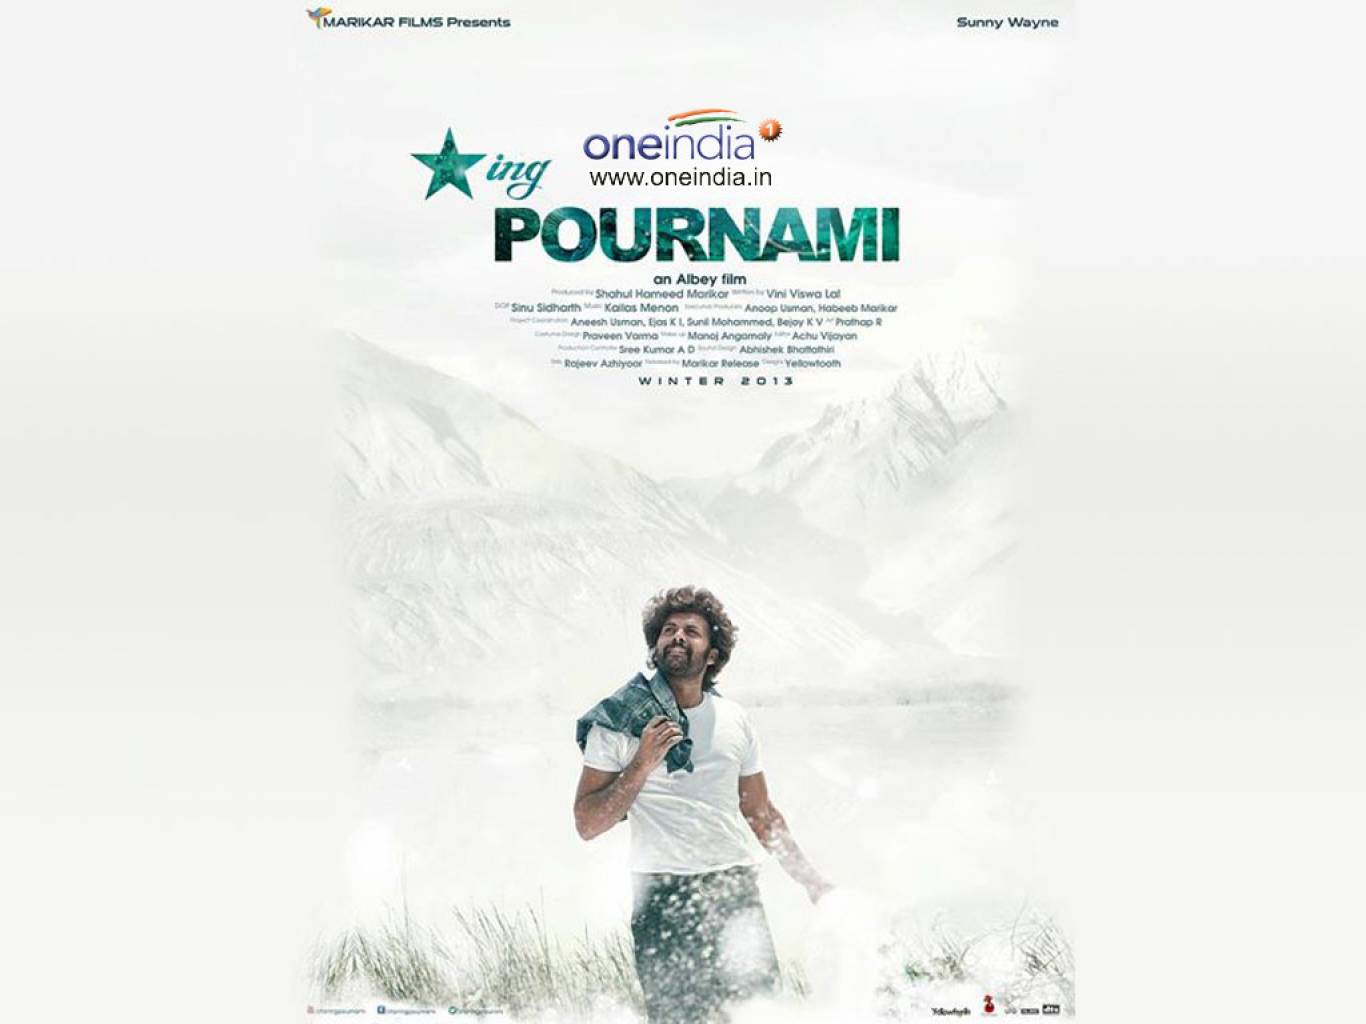 Starring Pournami Wallpapers - Malayalam Movie Poster Designs - HD Wallpaper 